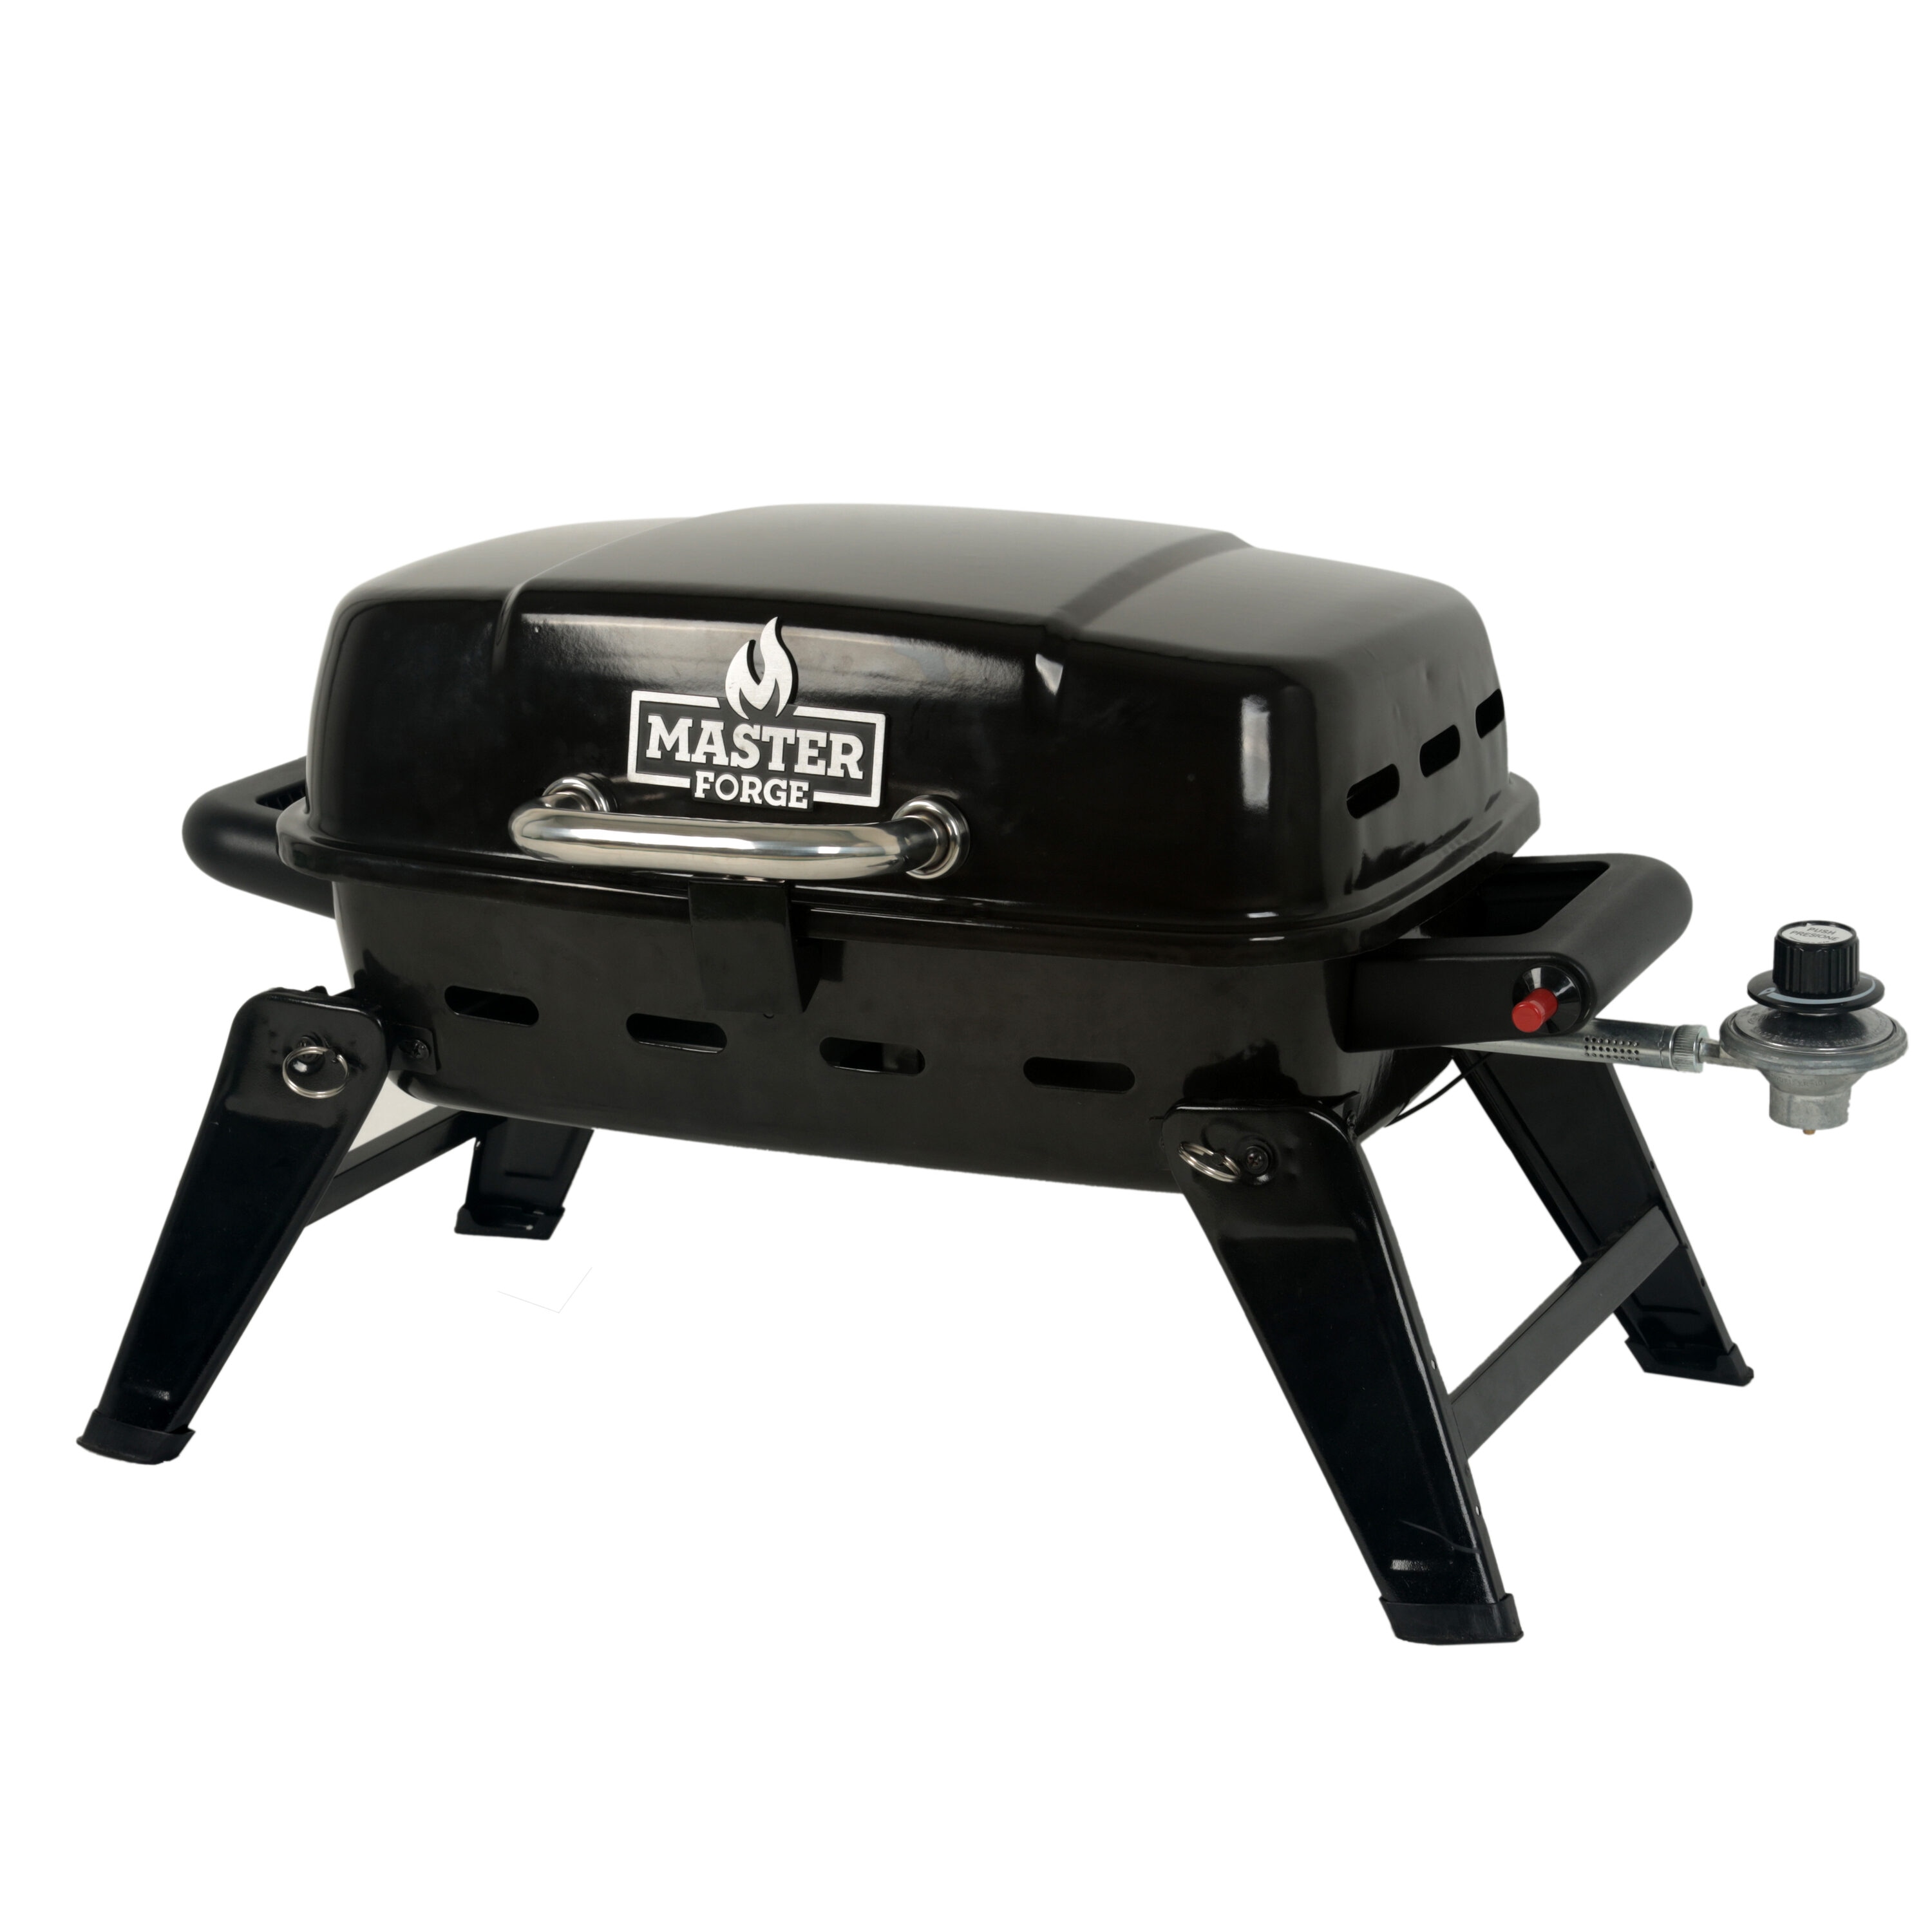 Camp Chef 17-Inch Portable Cast Iron Charcoal Grill - CIGR19